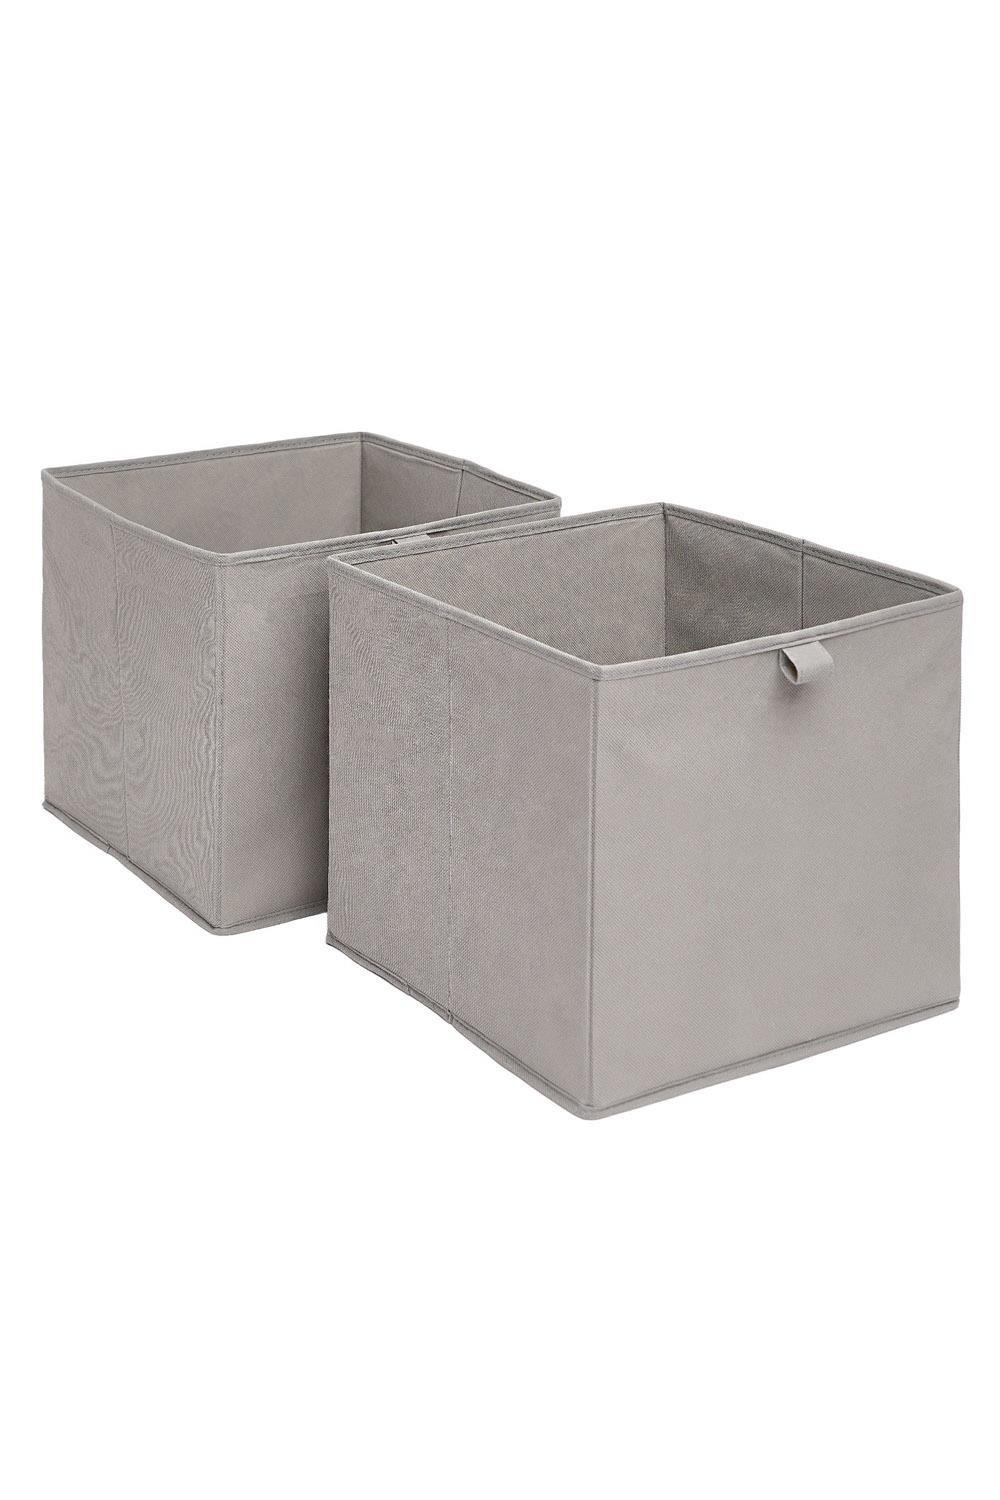 OHS Pack of 2 x Plain Folding Cube Storage Boxes|grey